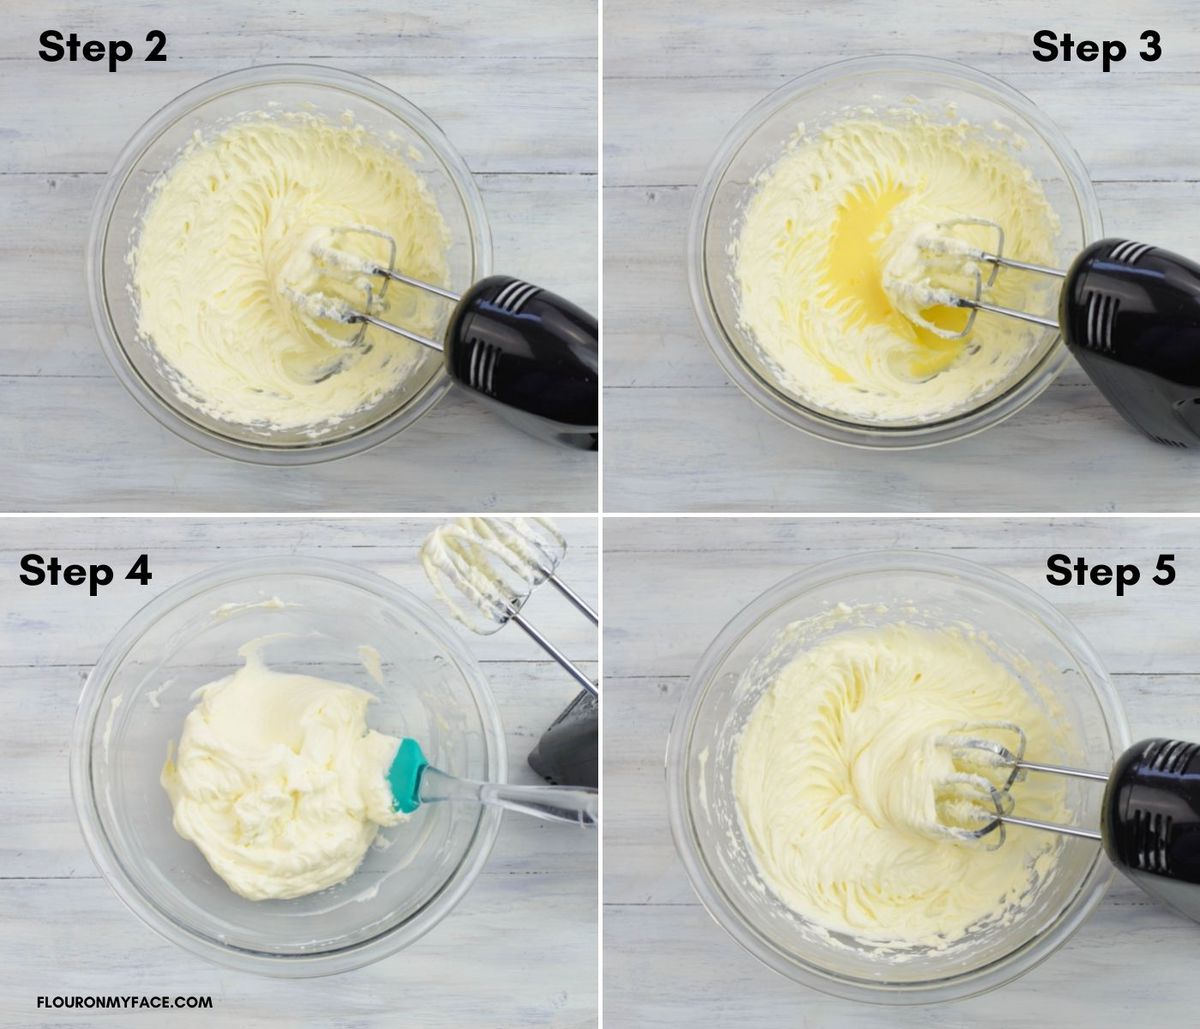 4 steps to combining butter, cream cheese and egg to make a pastry dough.